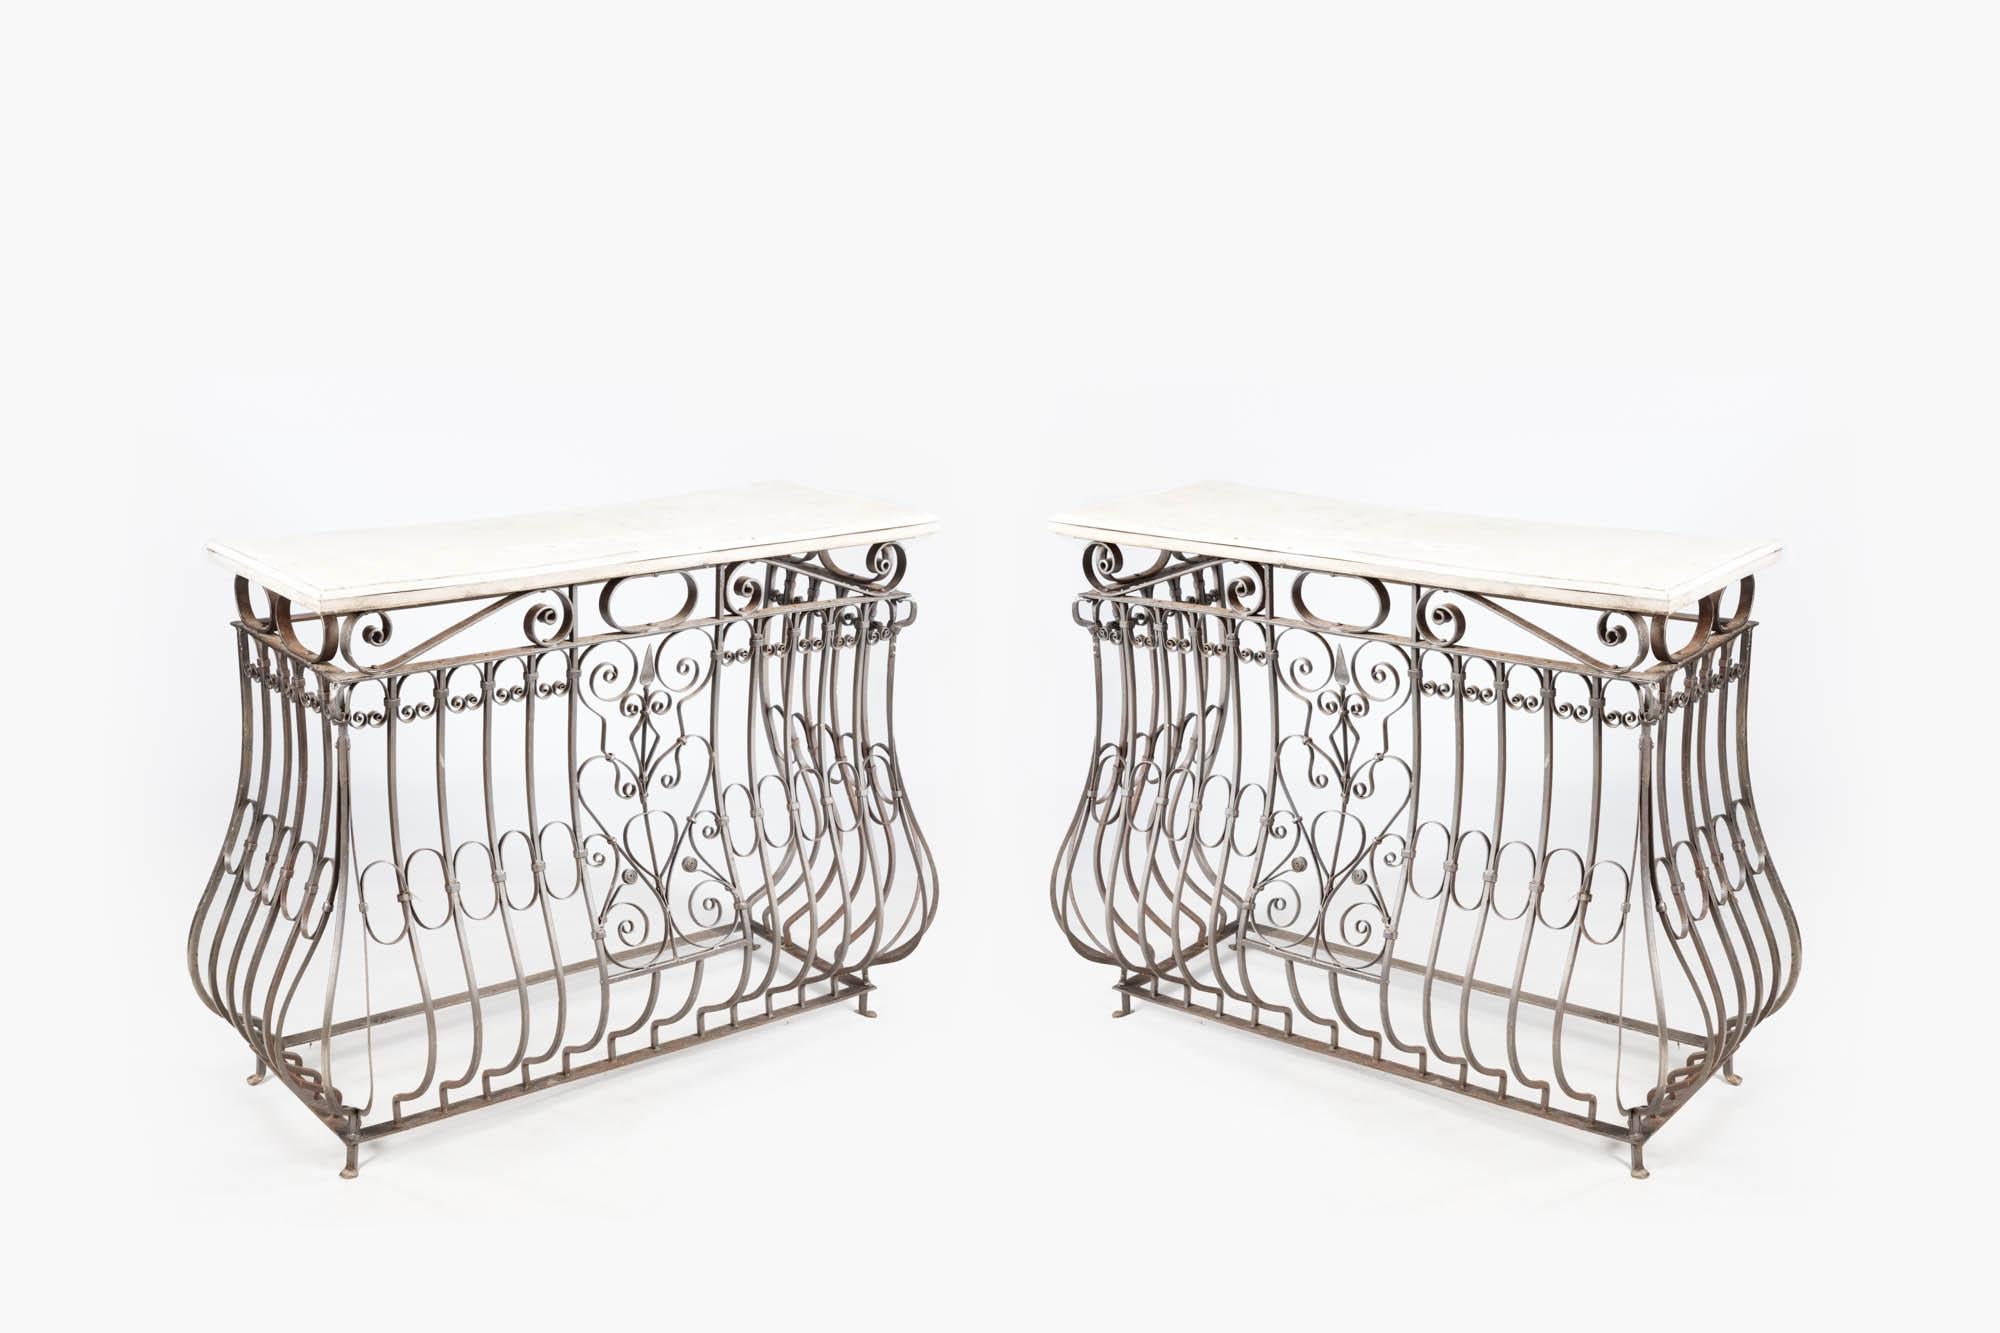 Pair early 20th Century decorative wrought iron balconies with ornamental scrolling. The pair have been re-styled to work as console tables complete with simple rectangular wooden tops.